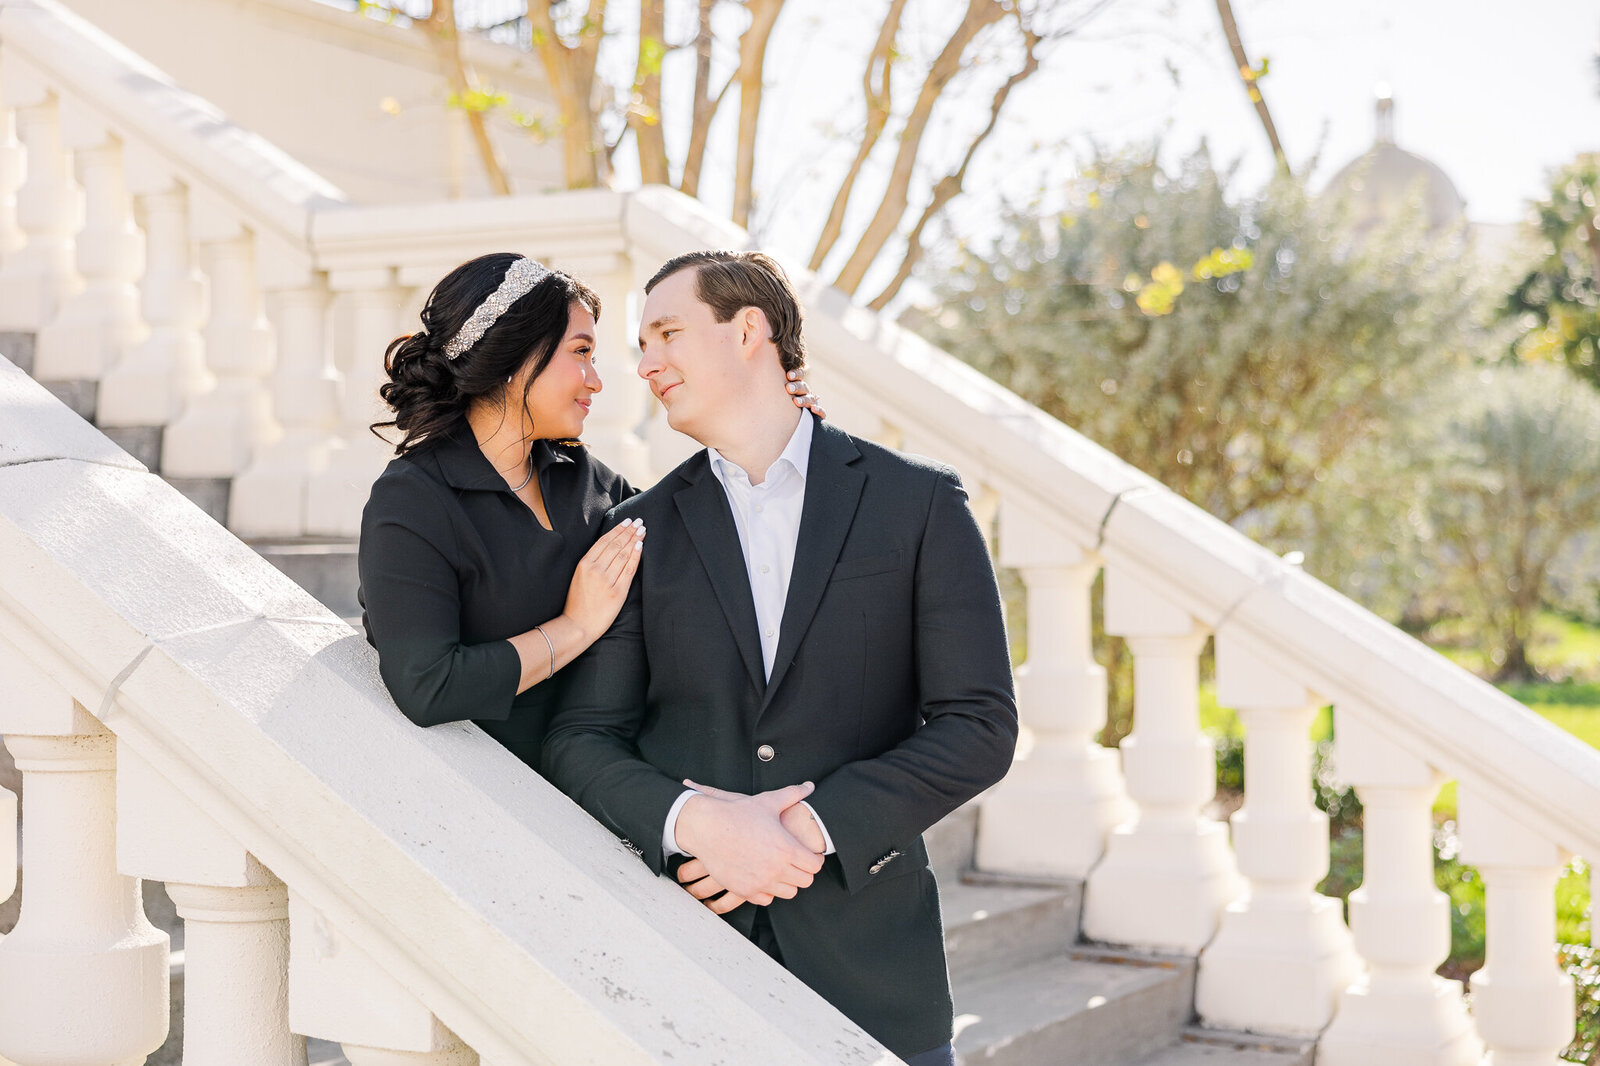 An interracial couple look into eachother's eyes while standing on a white staircase